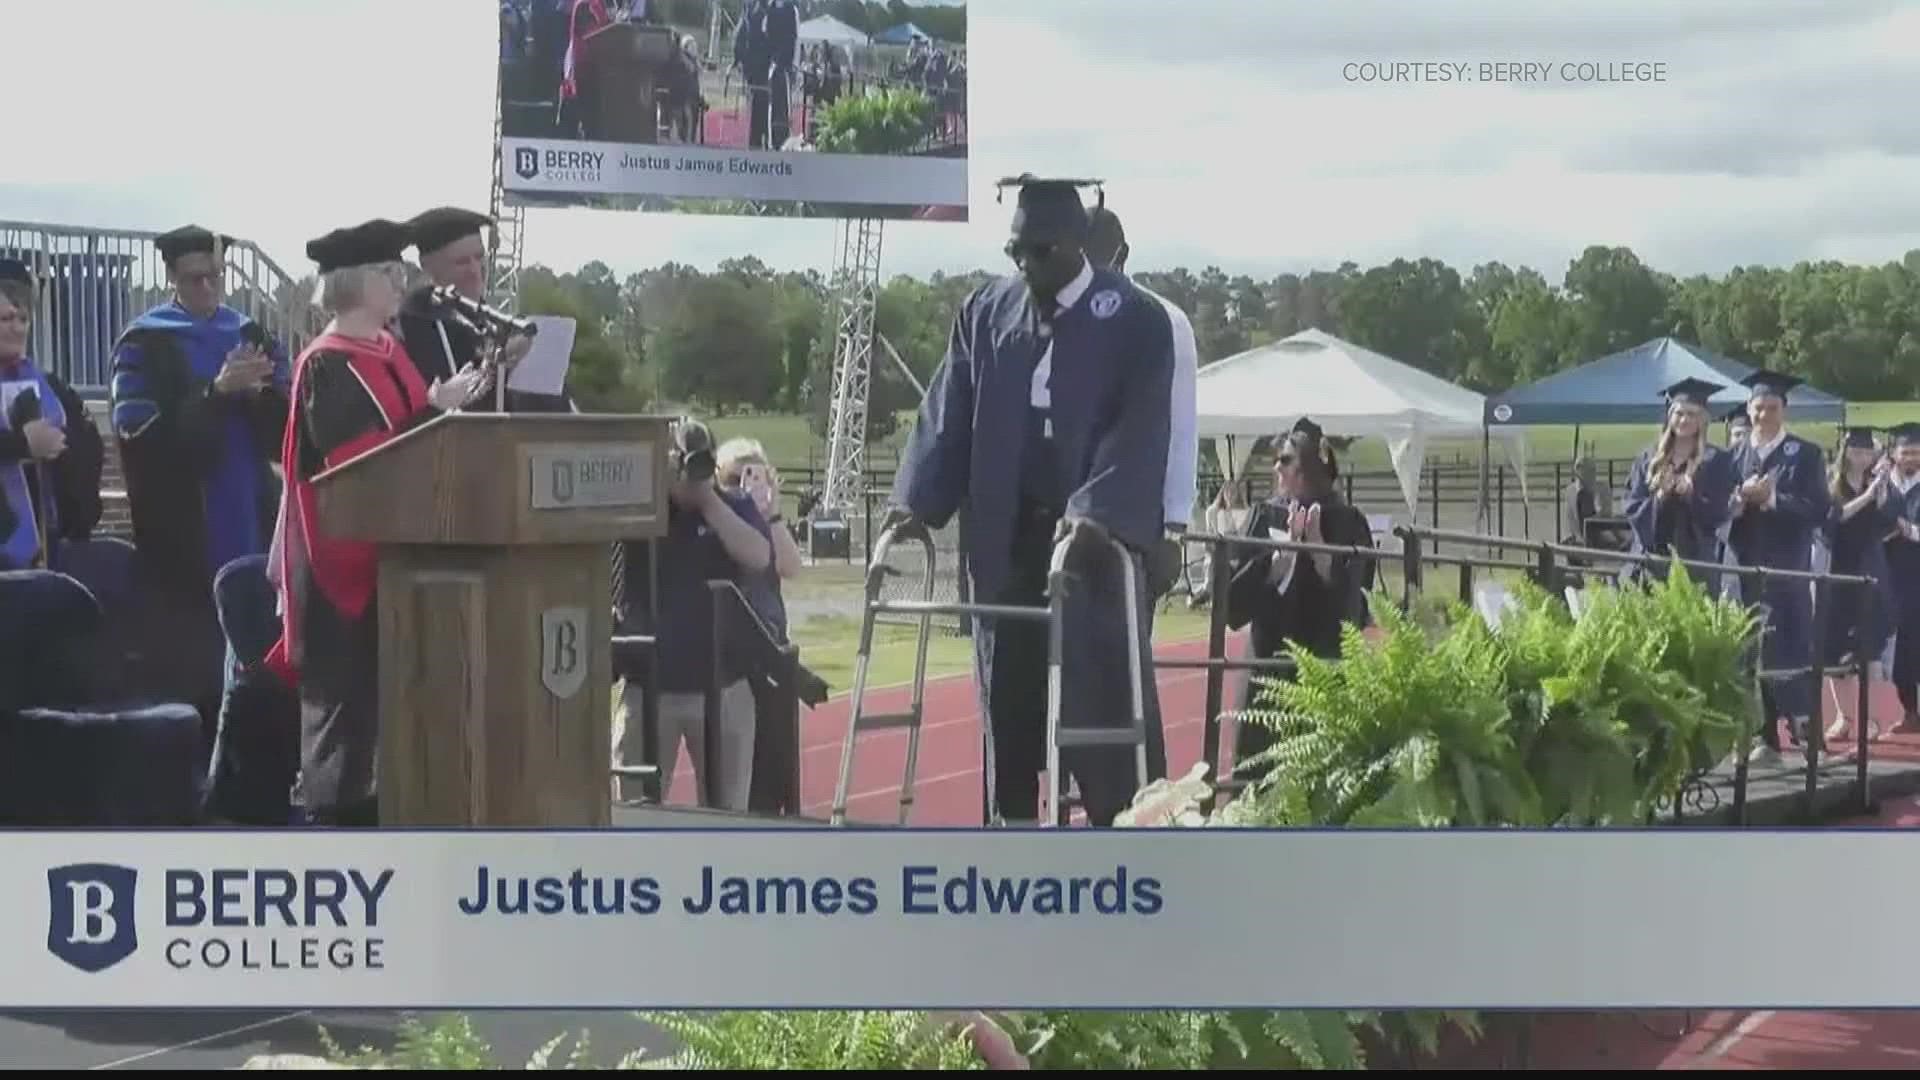 Justice Edwards earned his degree in exercise science, calling his graduation a "very fruitful day."